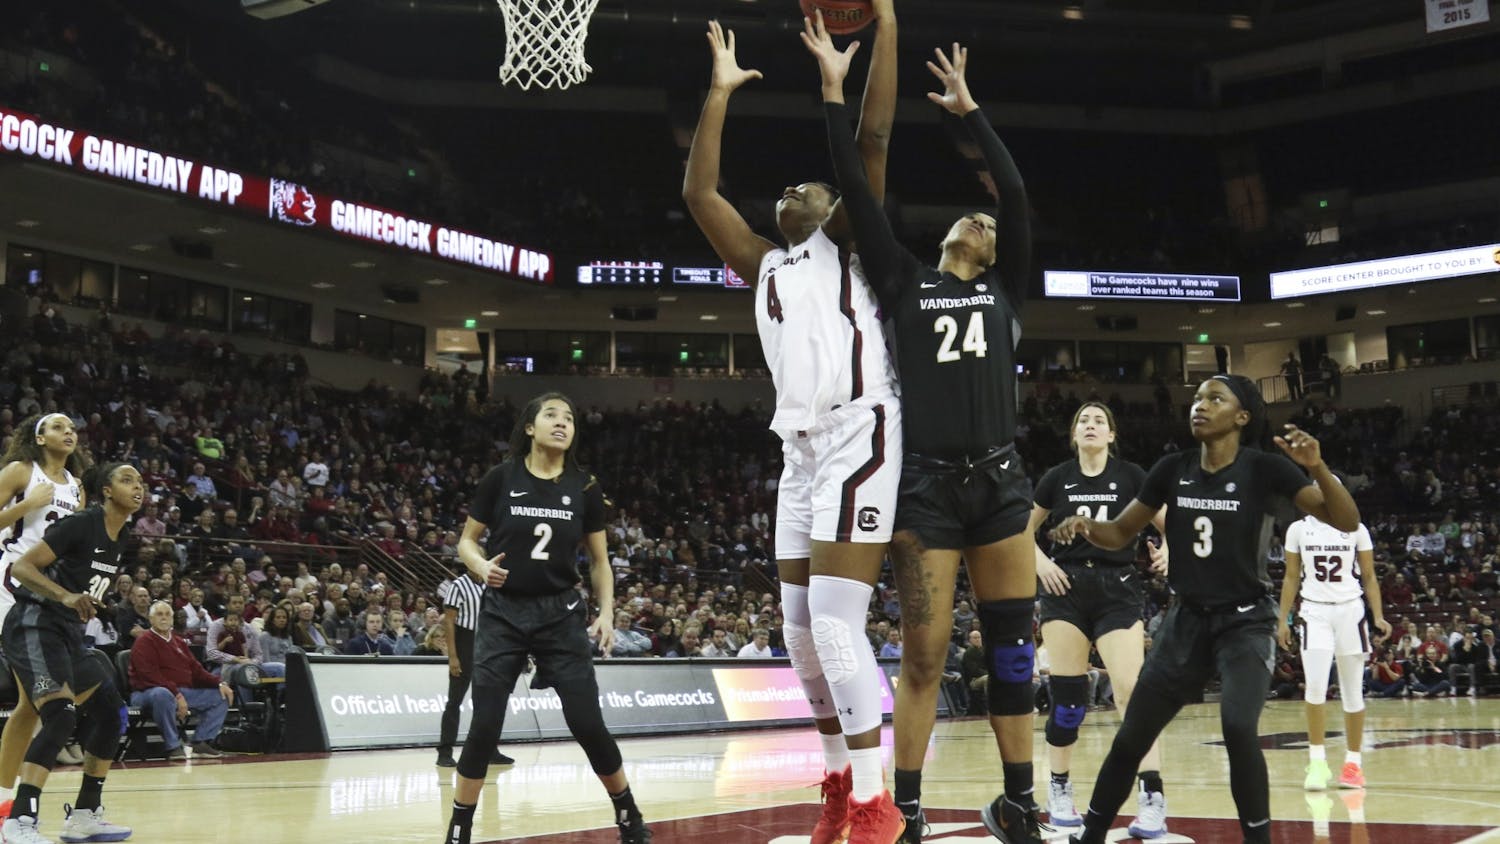 Sophomore forward Aliyah Boston goes up for a rebound in a 2020 game against Vanderbilt. The Gamecocks beat the Commodores 106-43 in Nashville on Thursday.&nbsp;